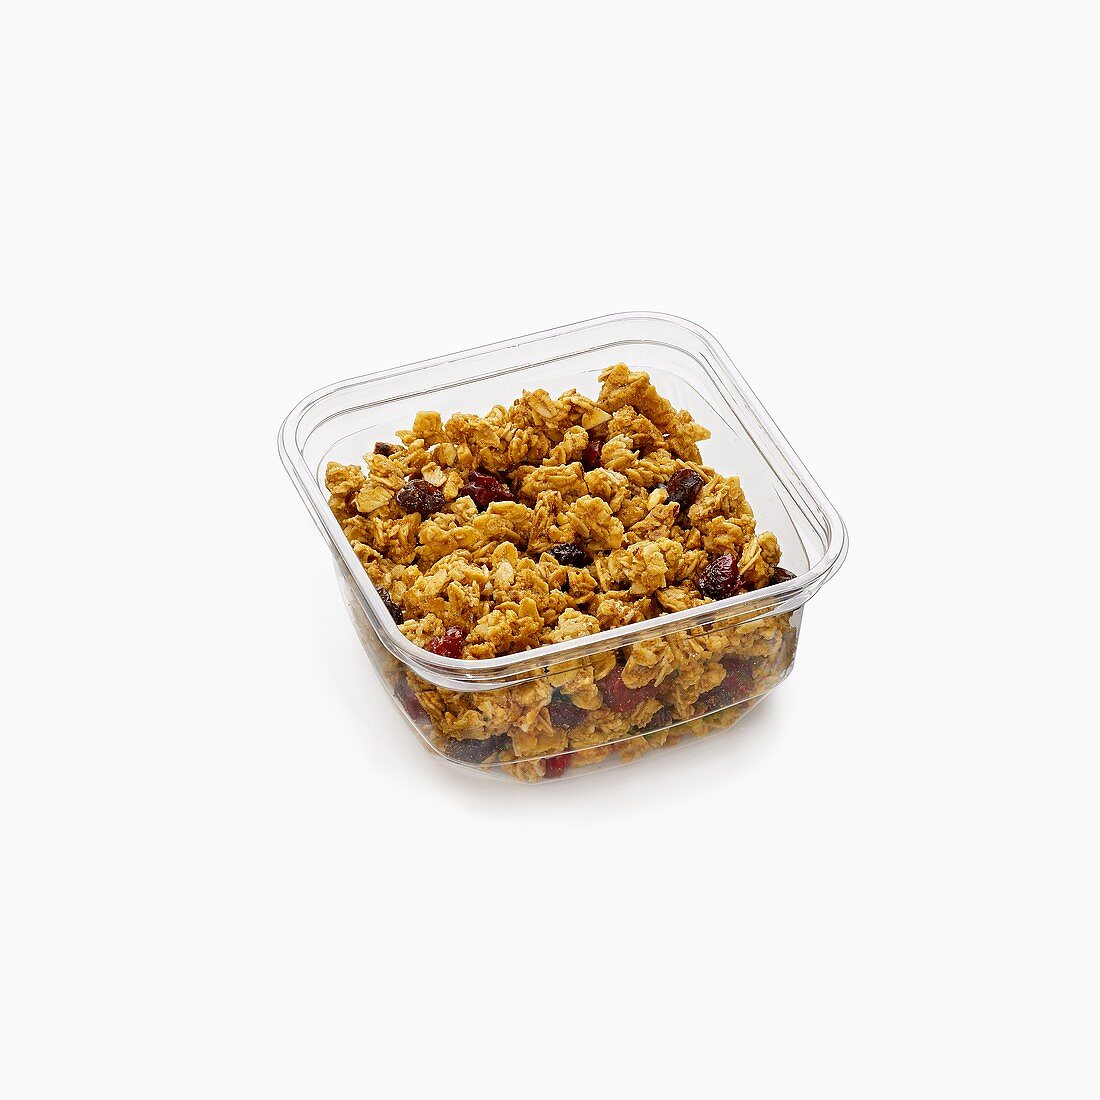 Small Container of Granola with Dried Fruit on a White Background